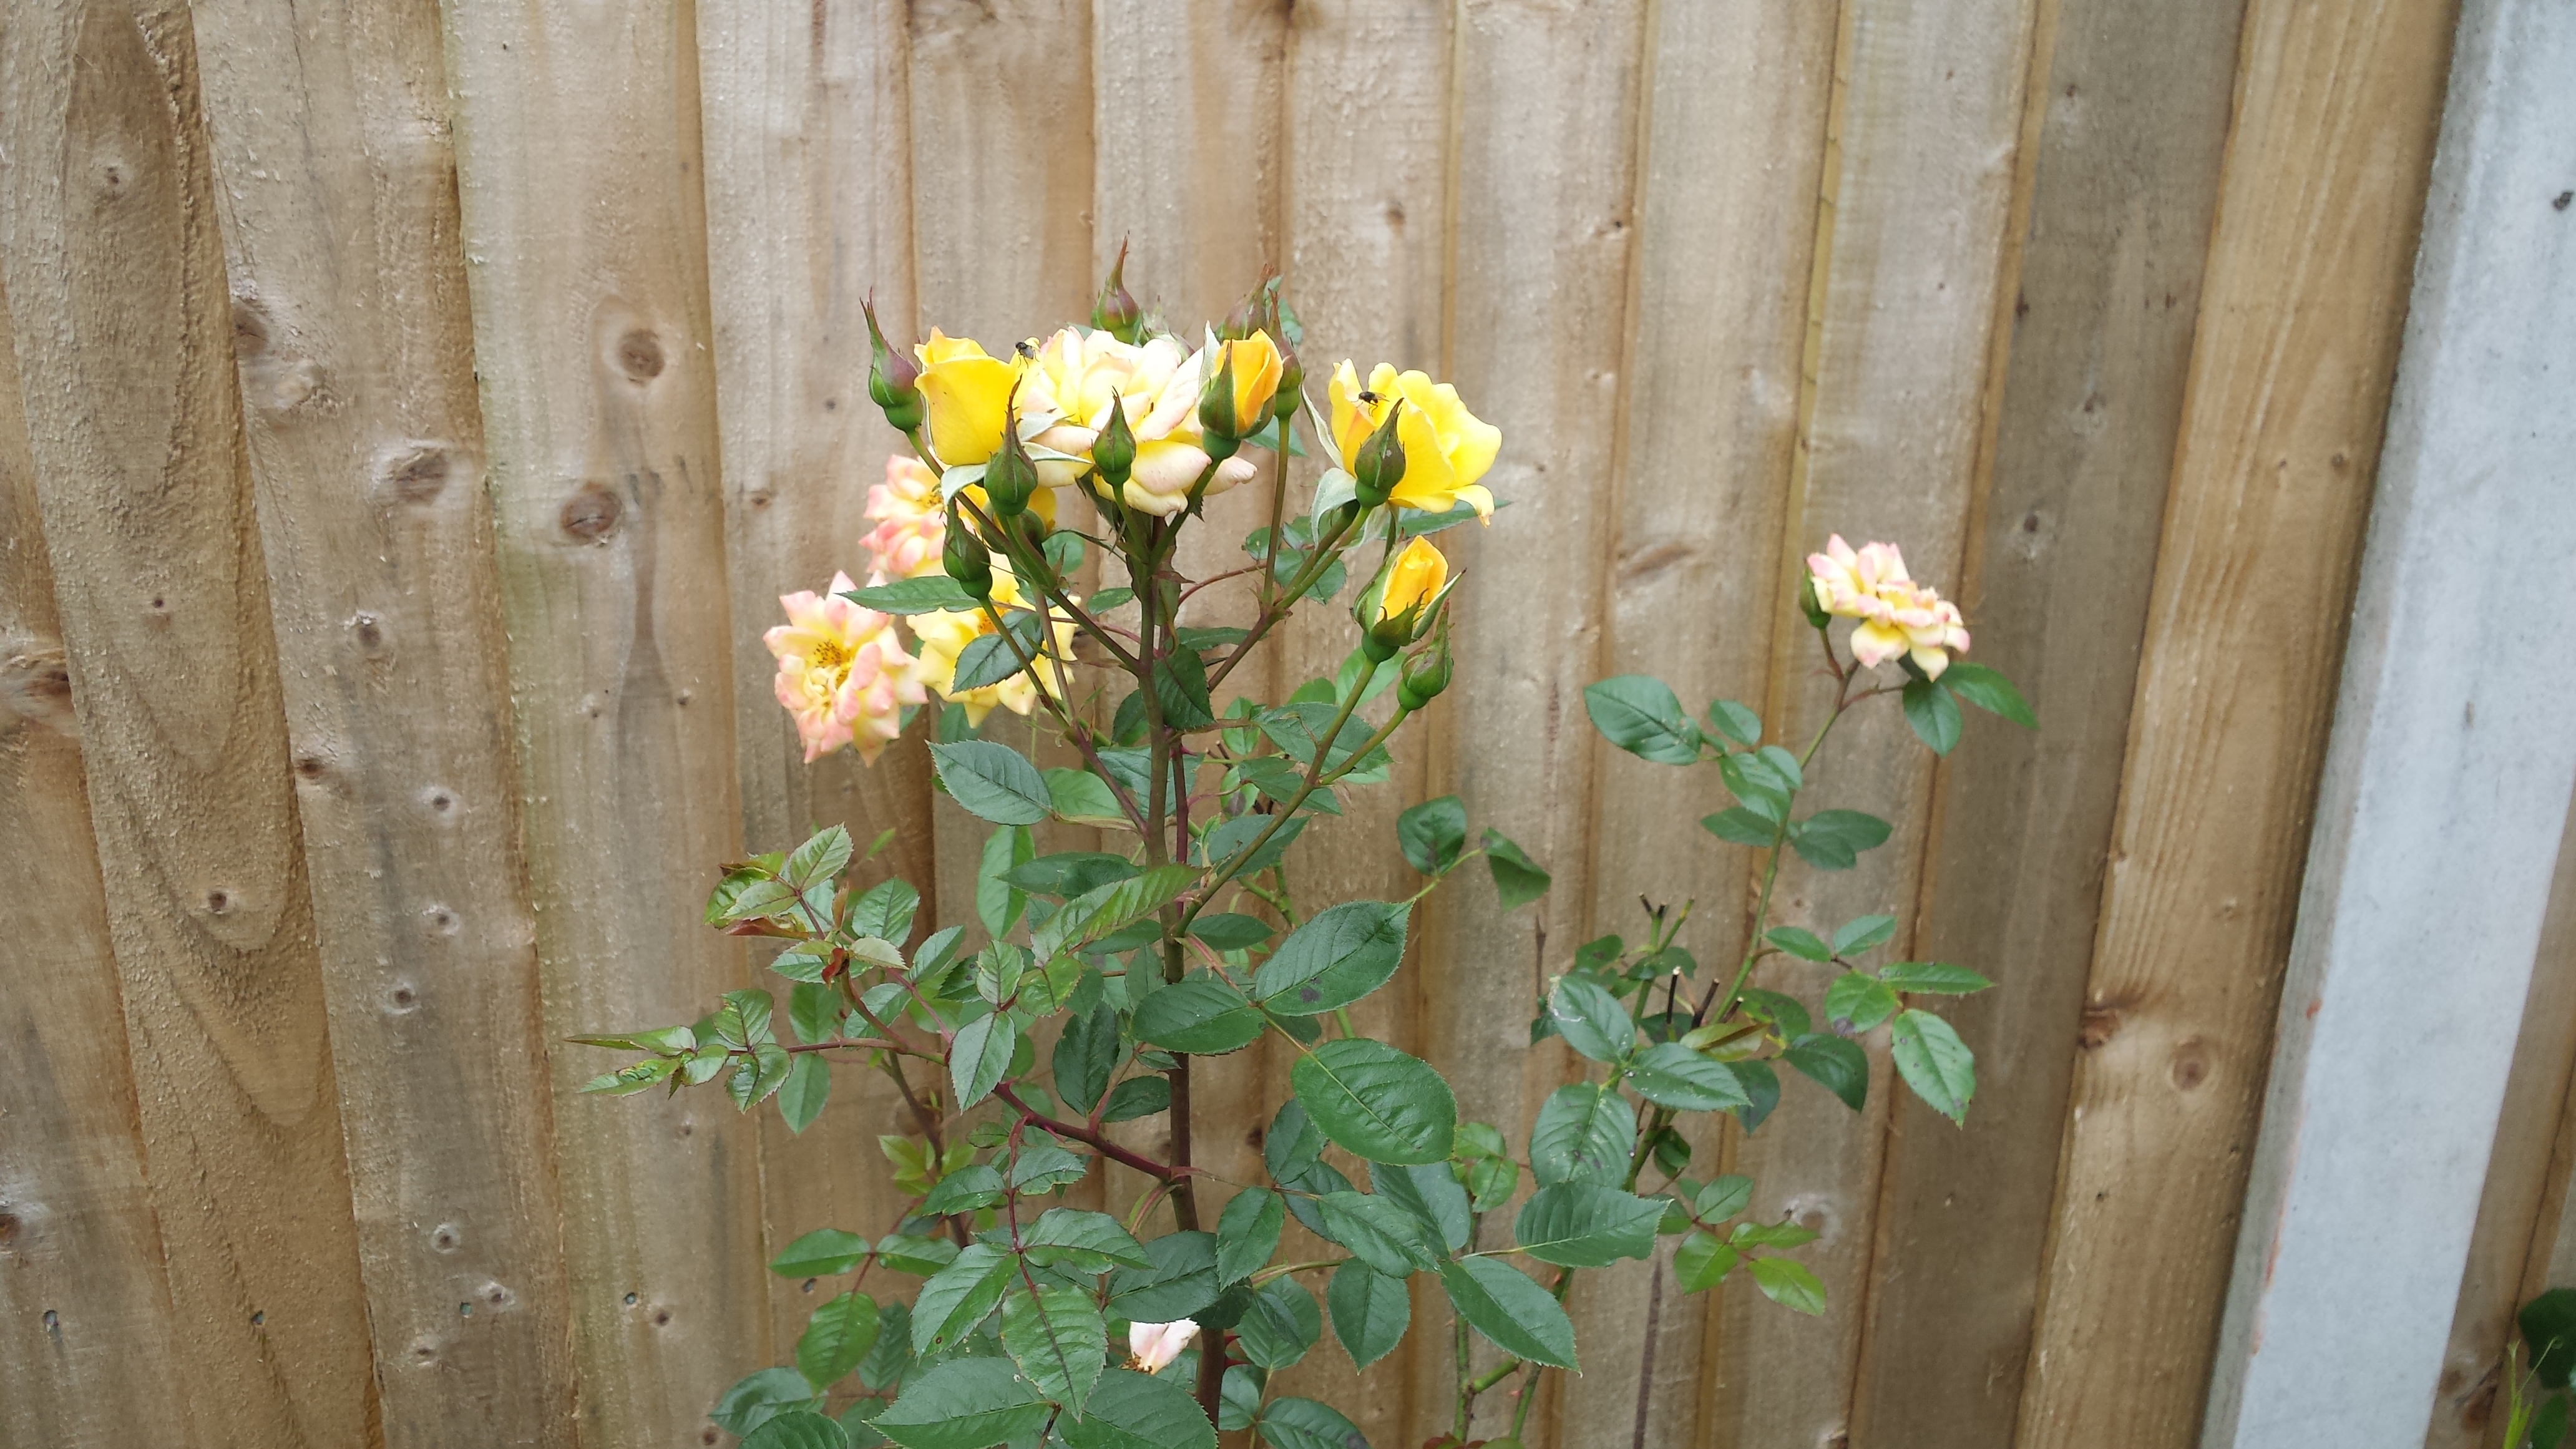 Flowers - Yellow Roses